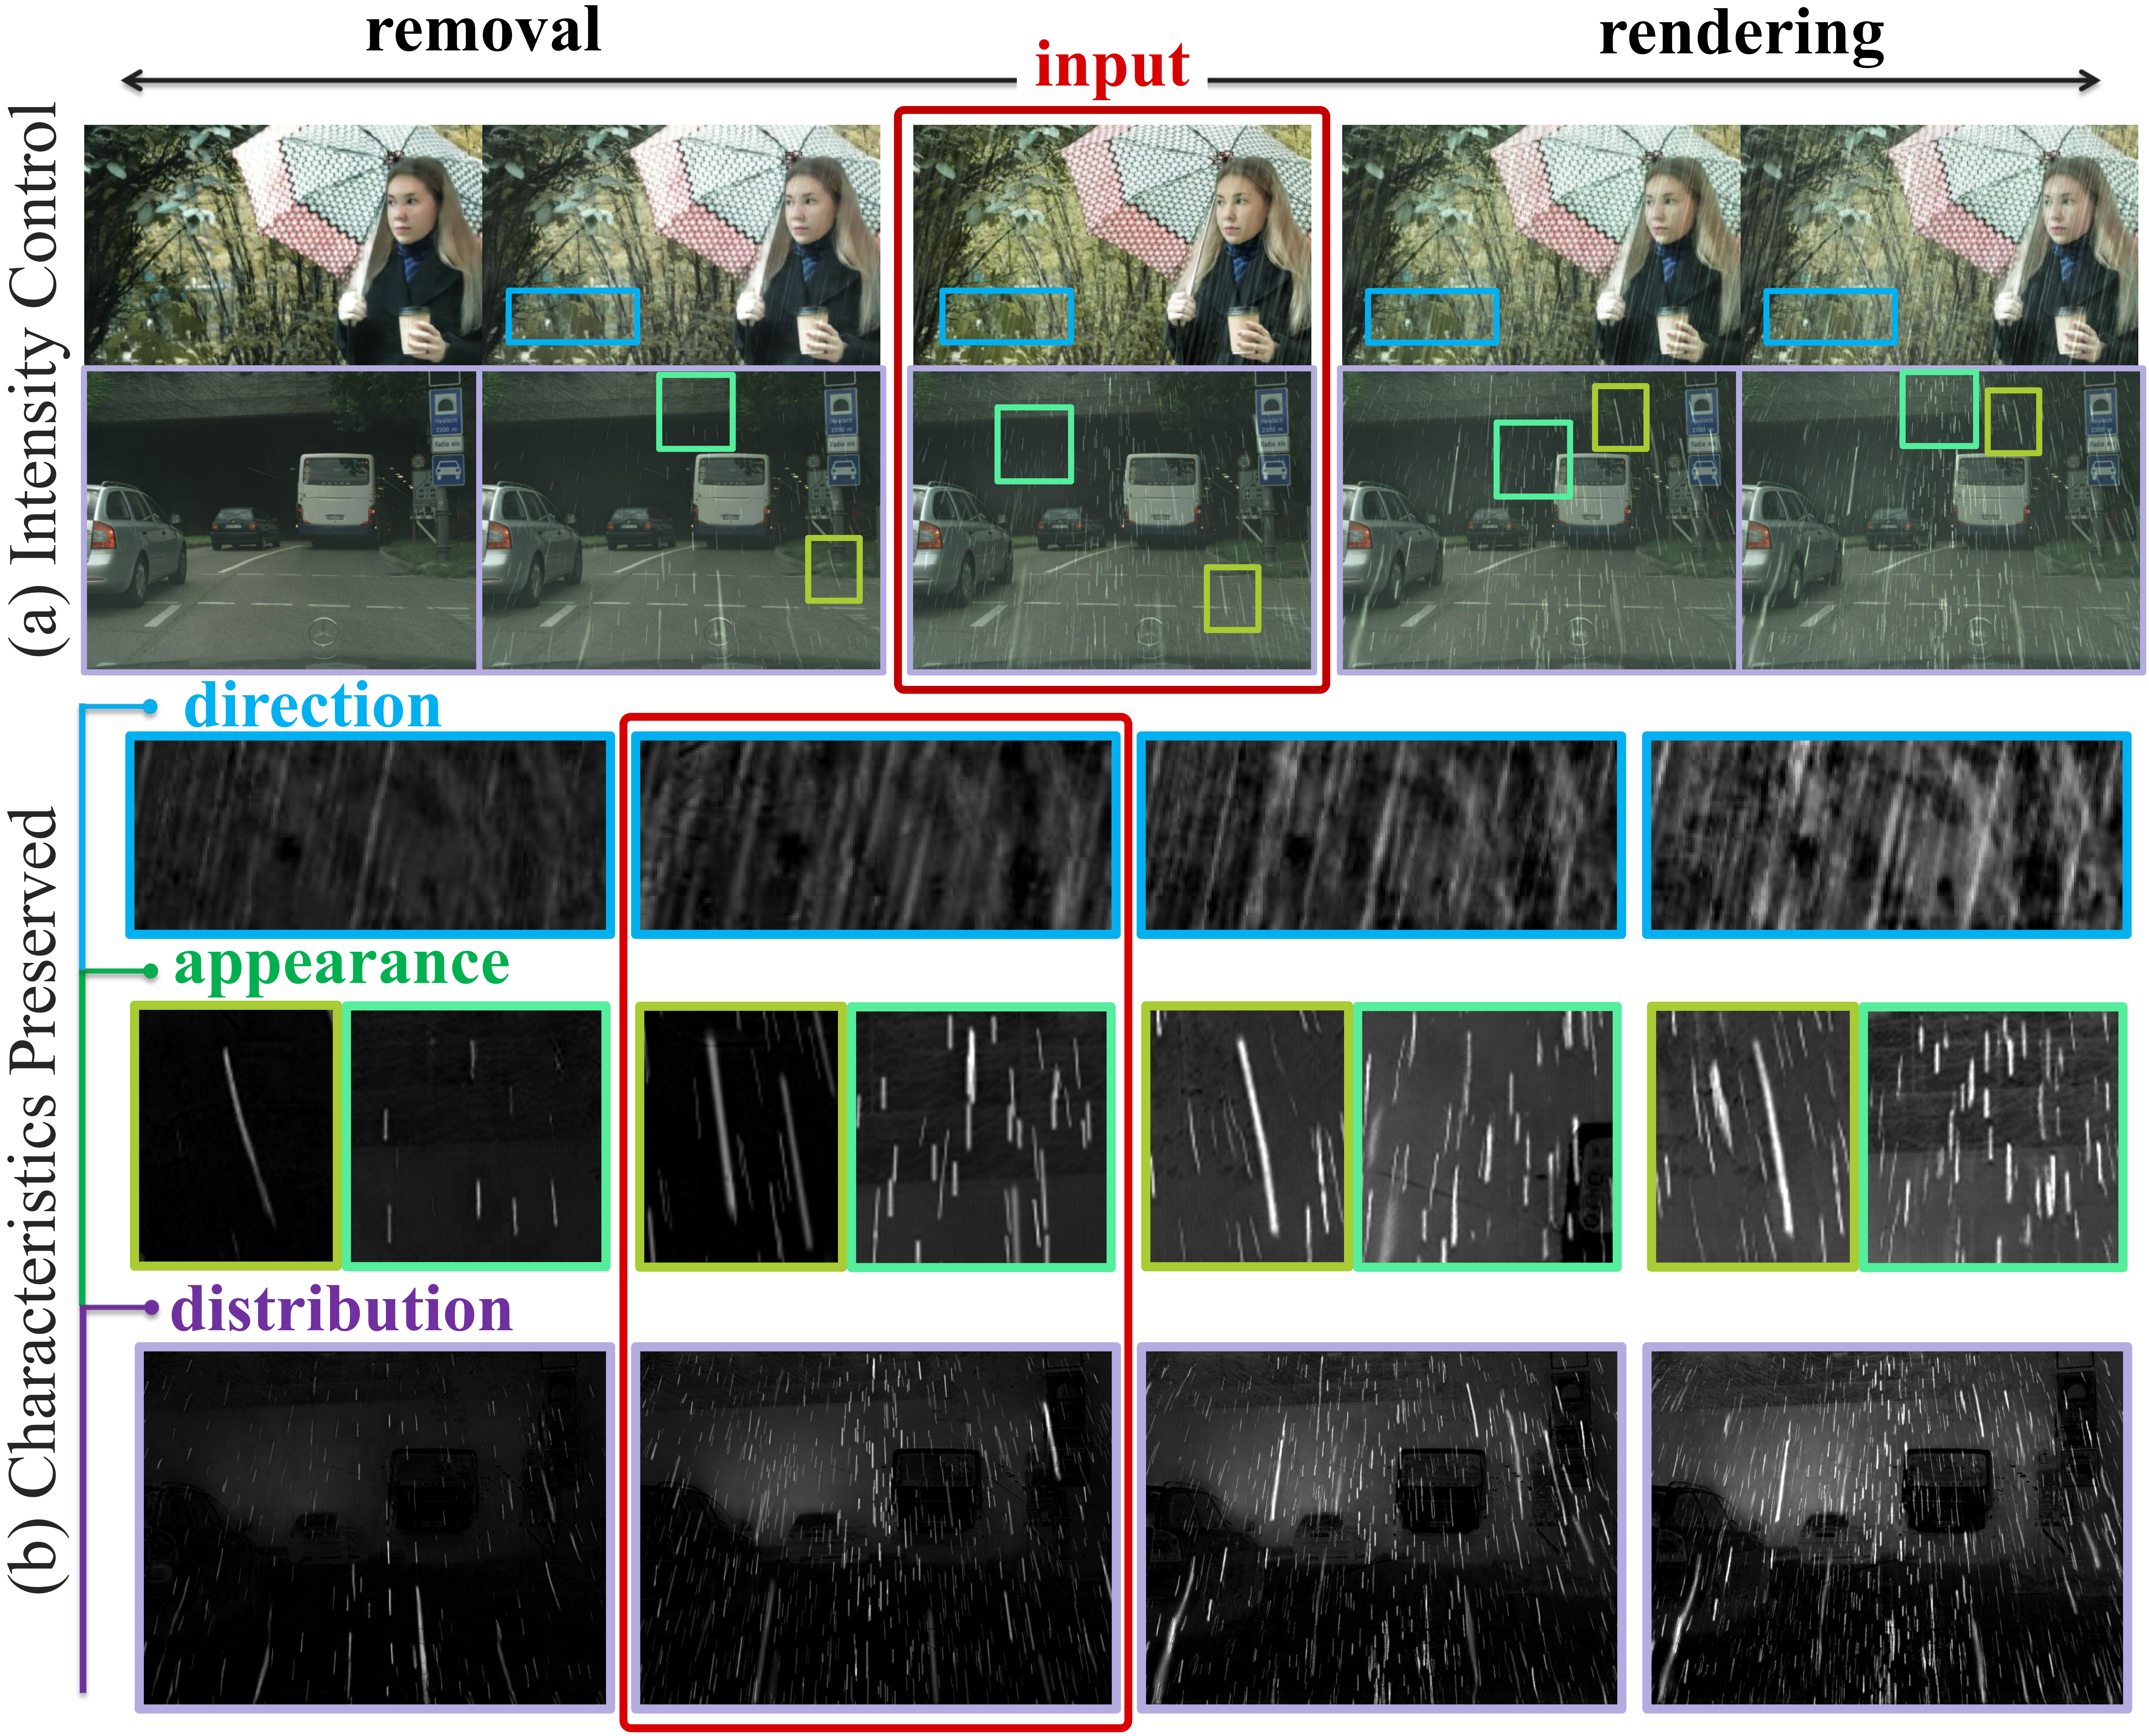 Controlling the Rain from Removal to Rendering | IEEE CVPR 2021